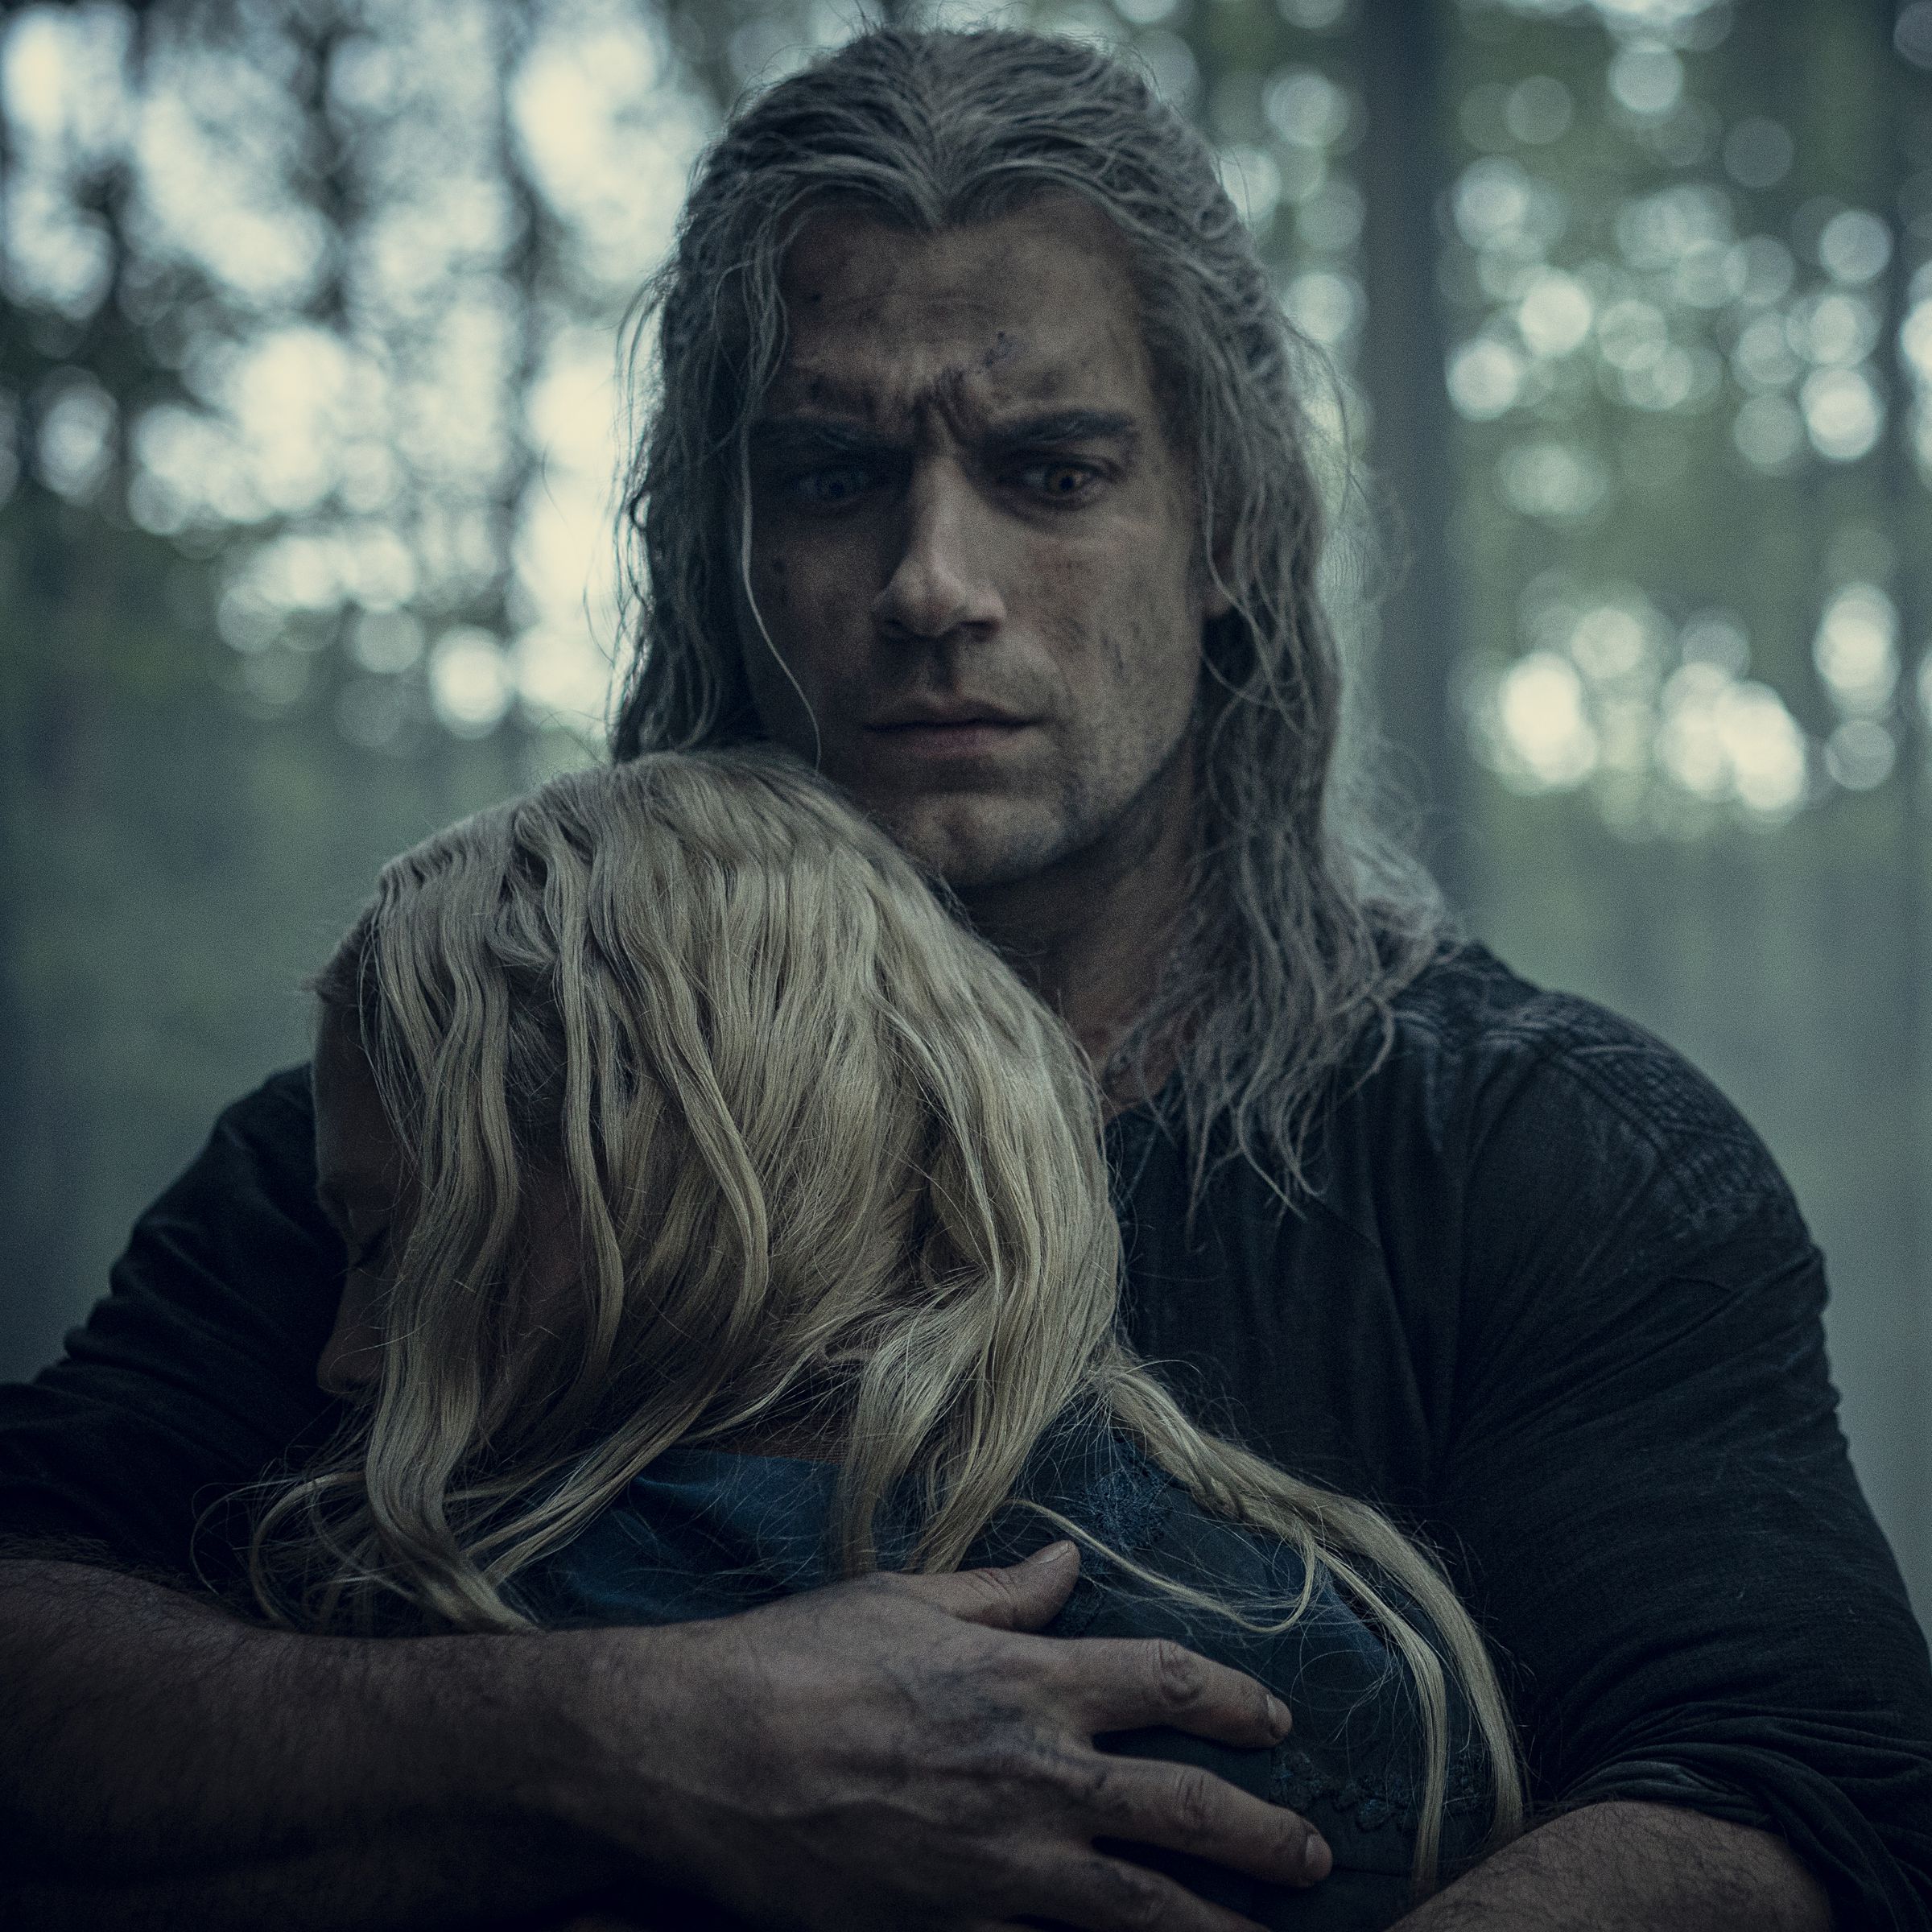 A still photo from Netflix’s The Witcher.